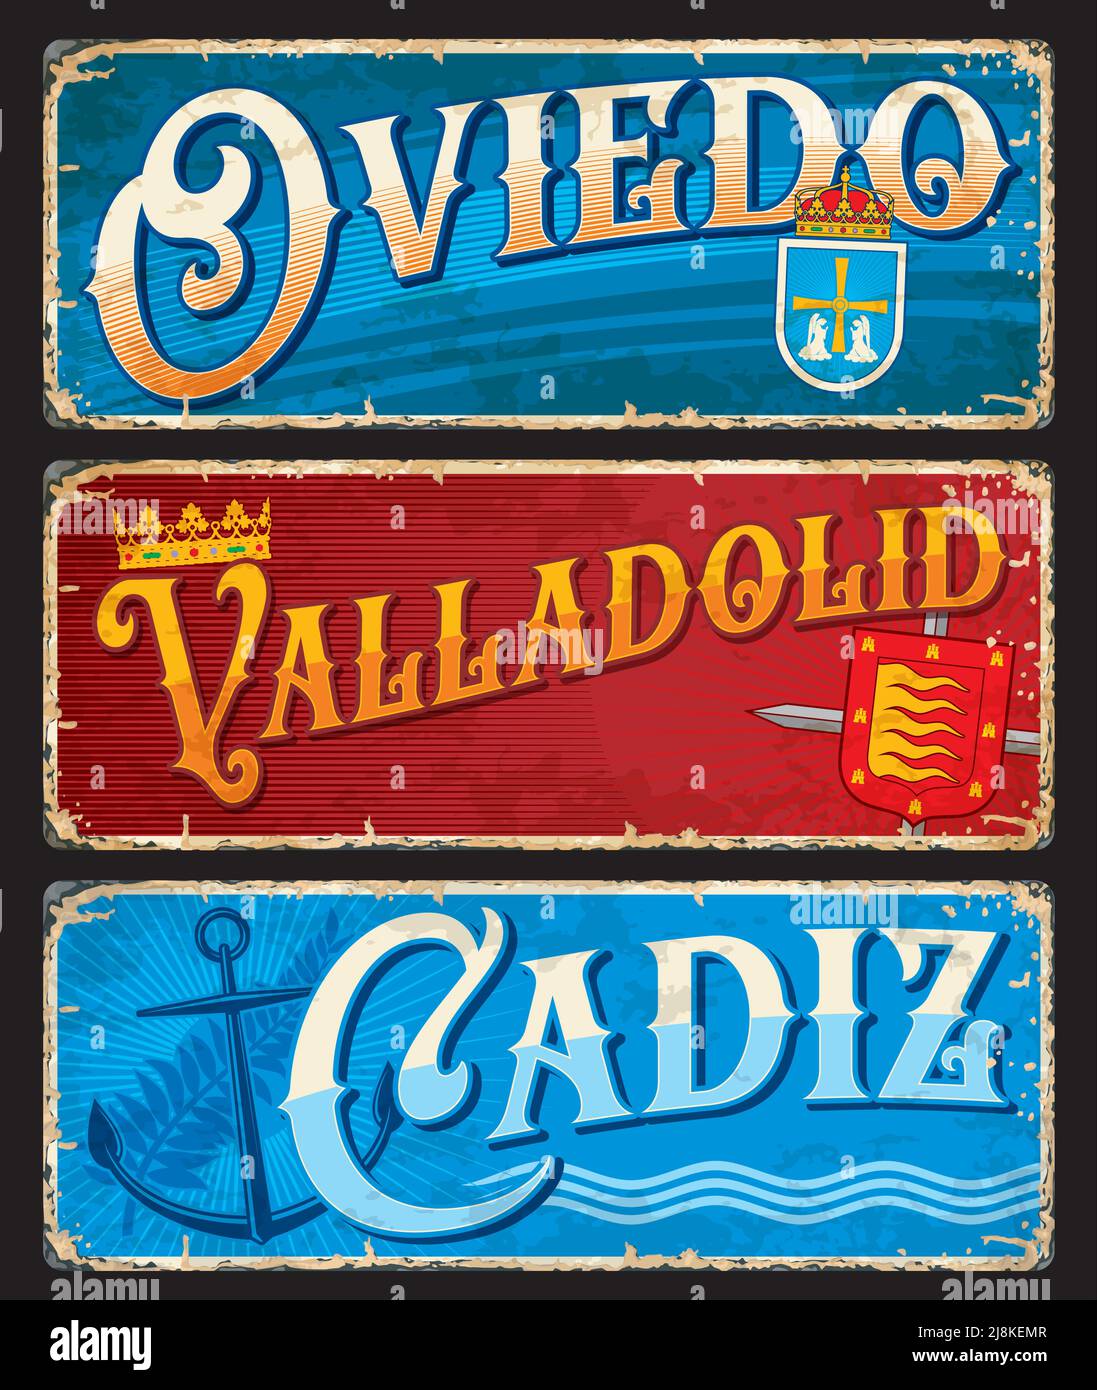 Oviedo, Cadiz, Valladolid spanish city plates and travel stickers. Vector vintage banners with Spain symbols . Anchor, sea waves, plant branch, heraldic coat of arms, touristic landmarks sign boards Stock Vector